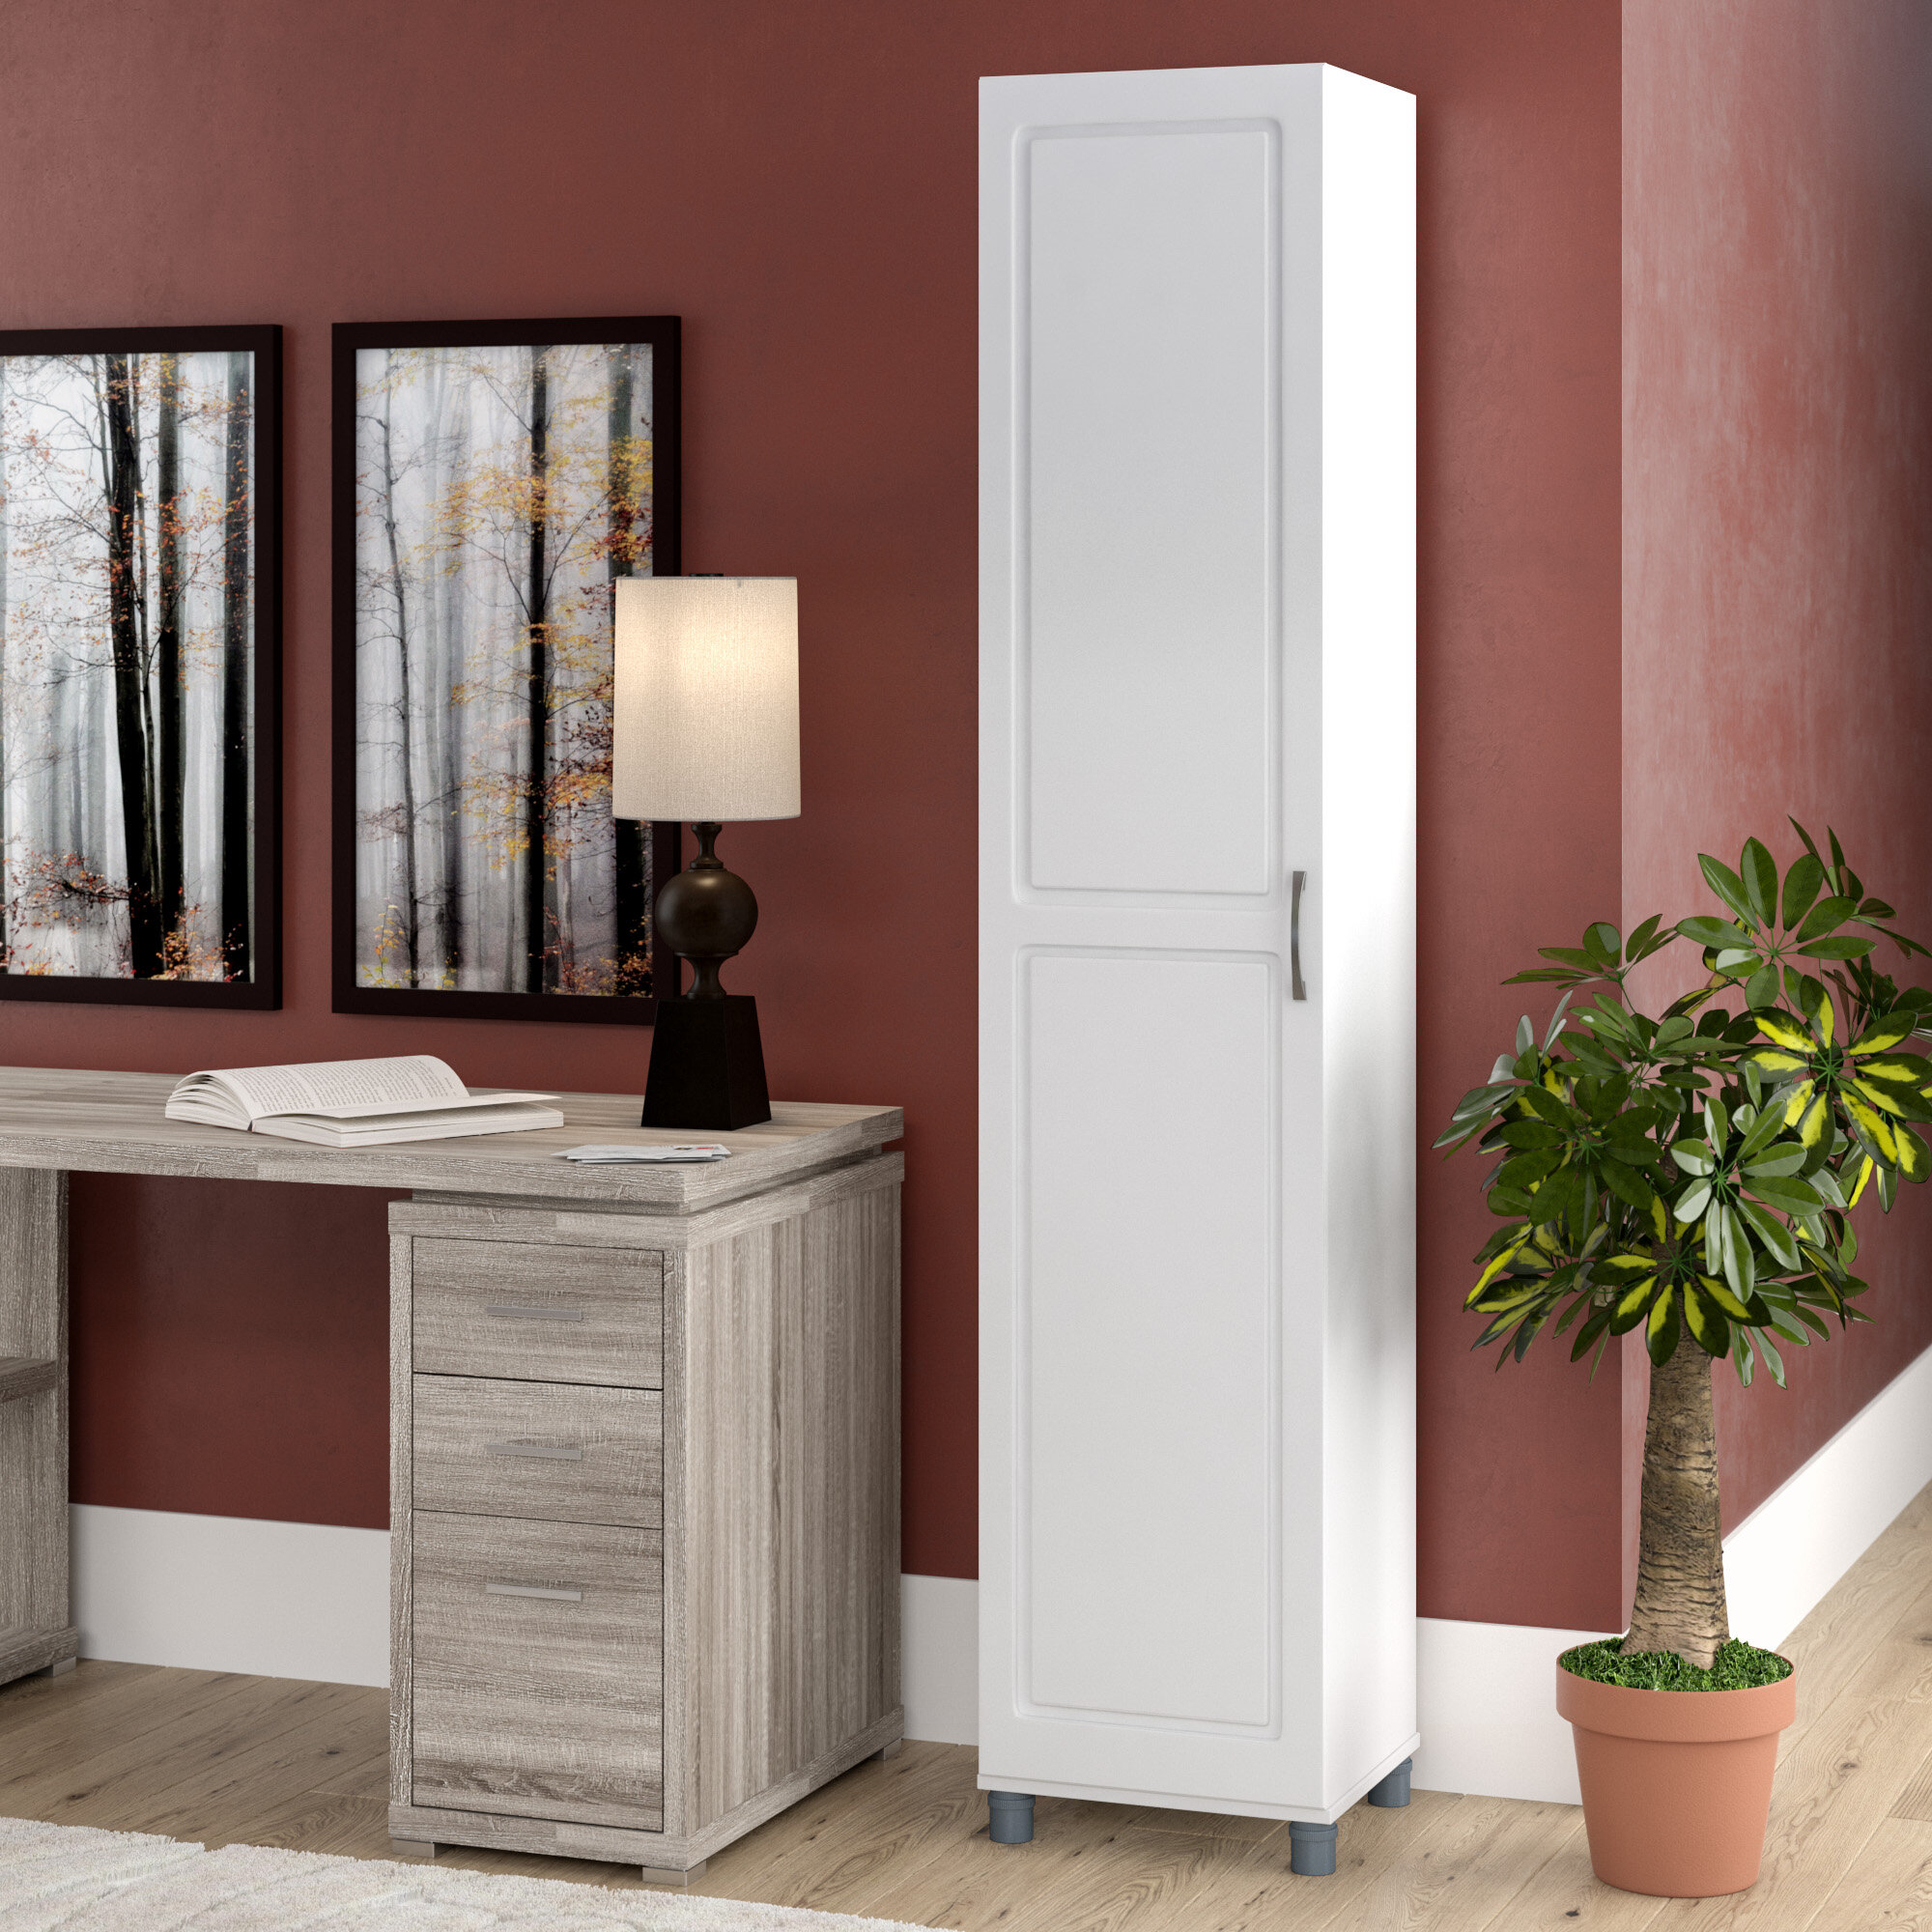 Tall Wood Storage Cabinets With Doors, Small Shelving Unit With Doors